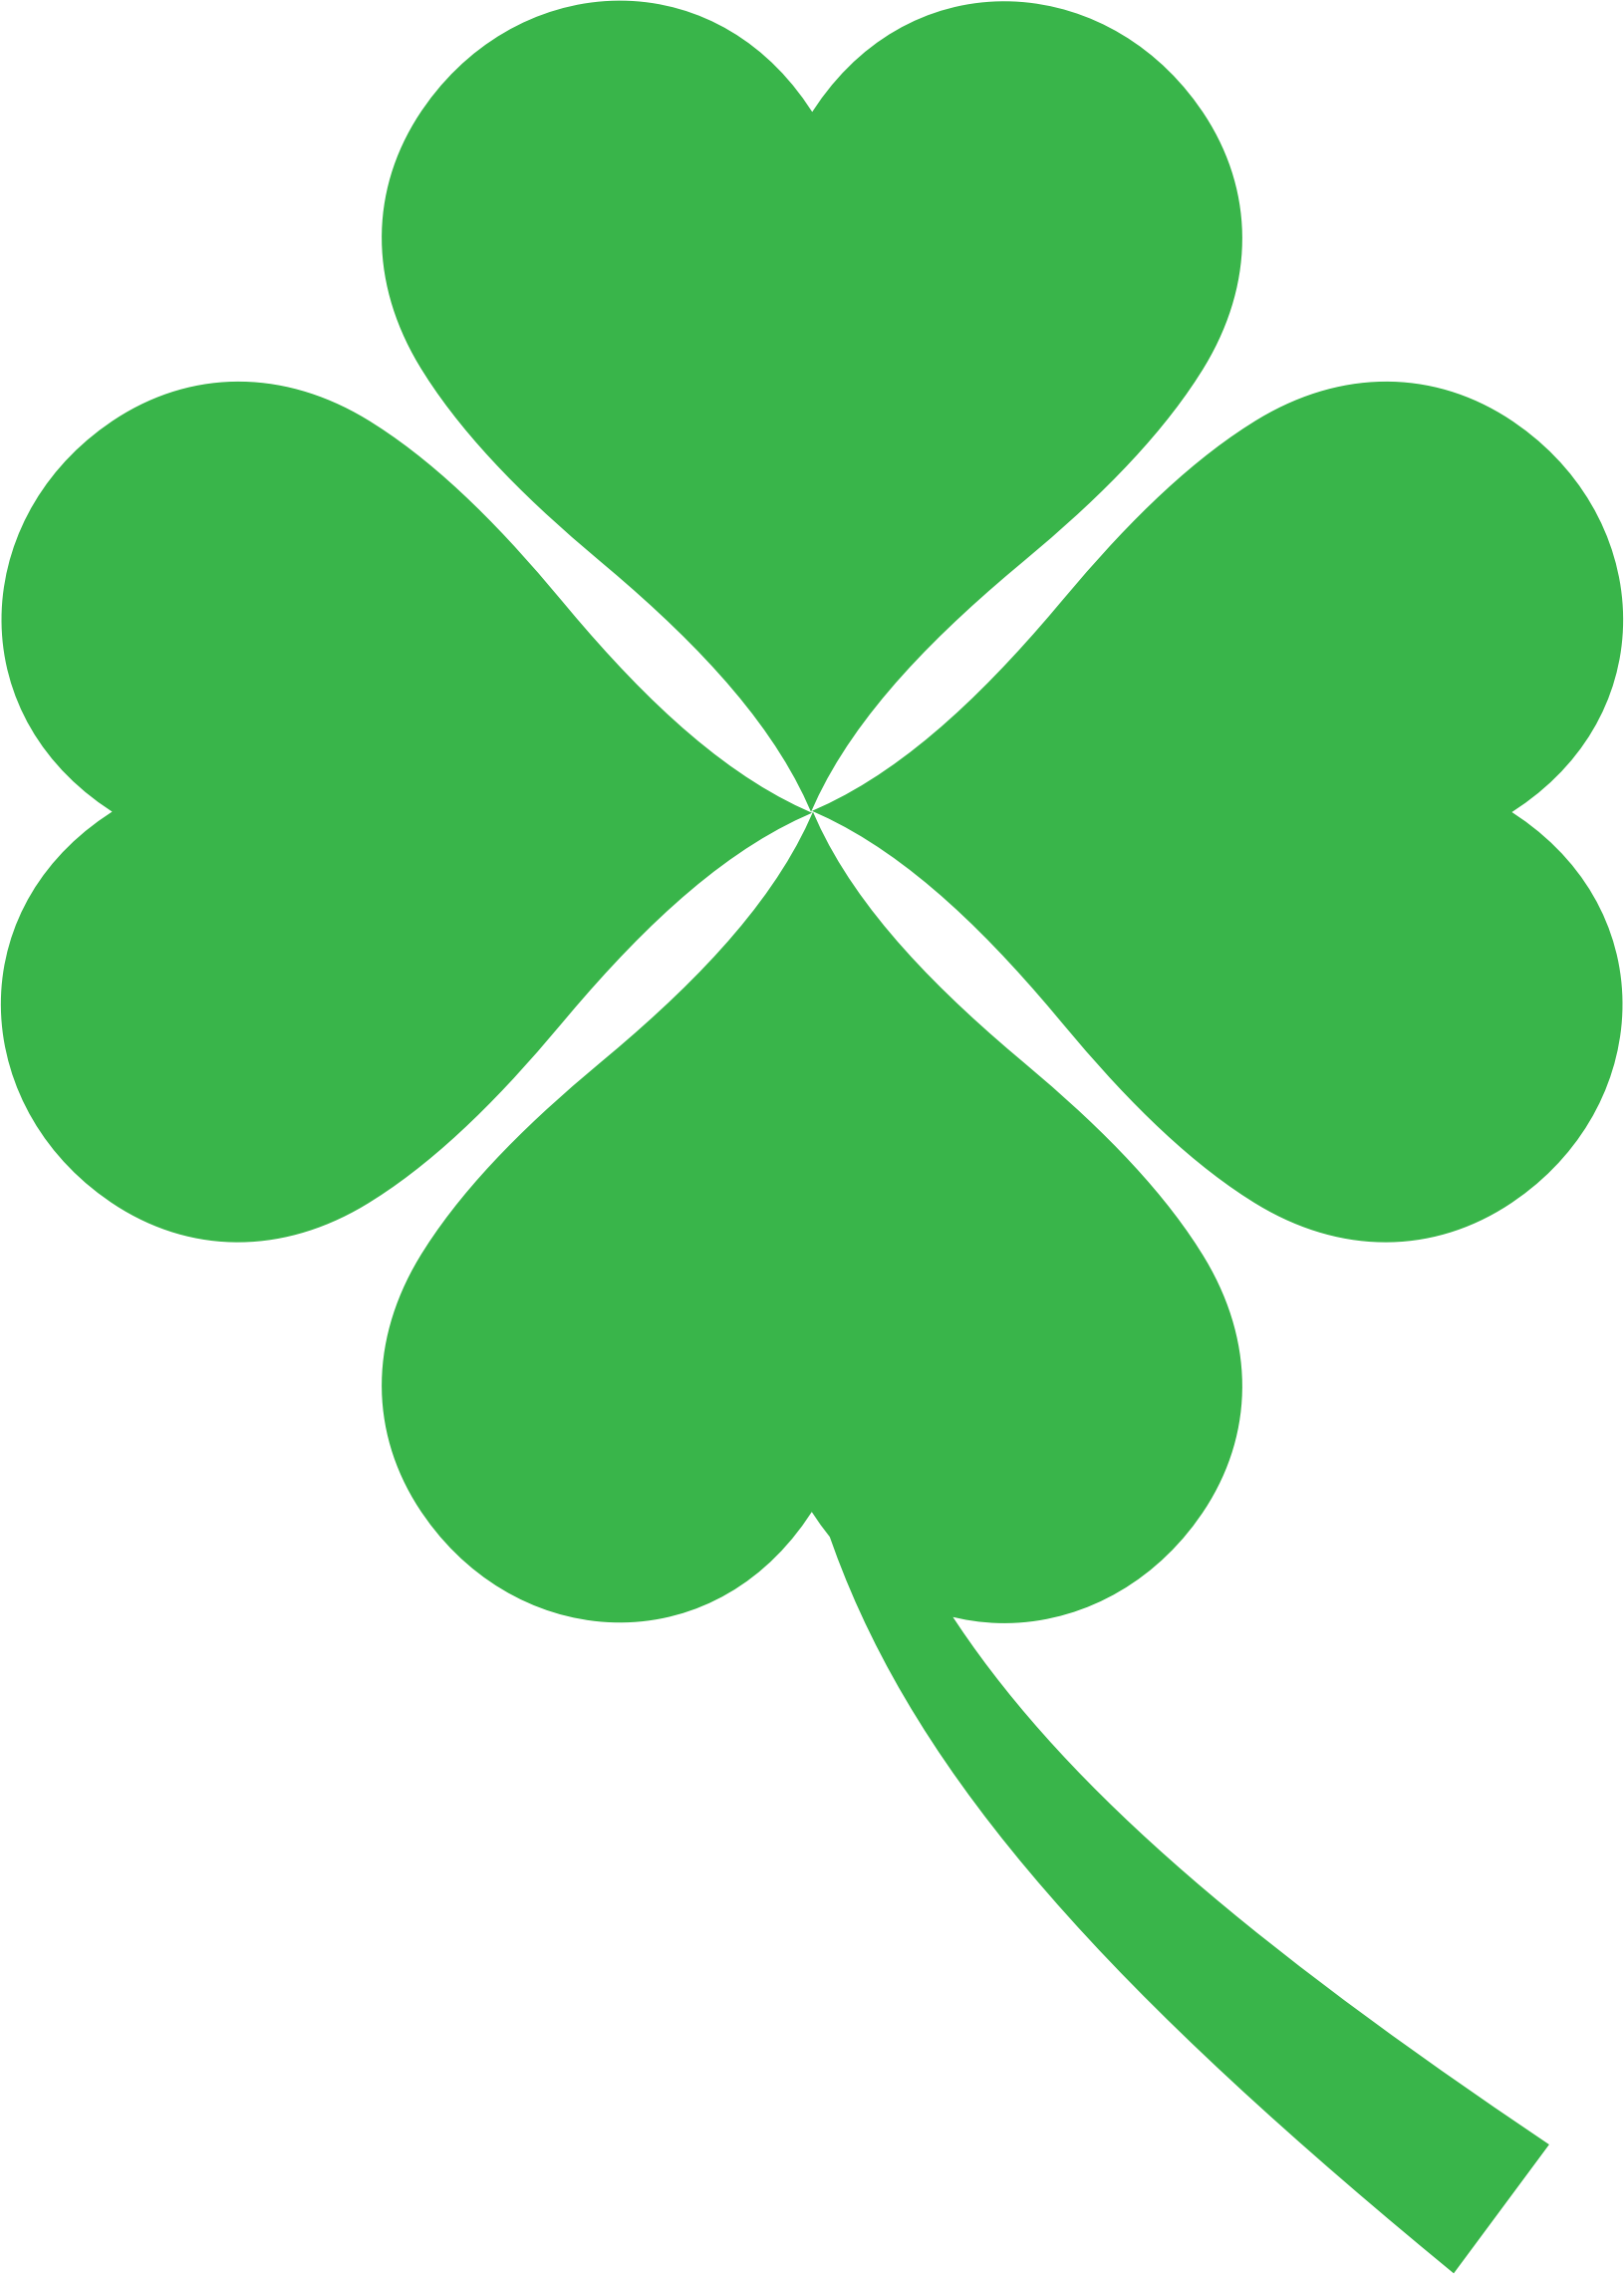 Download PNG image - Clover PNG Transparent Picture 